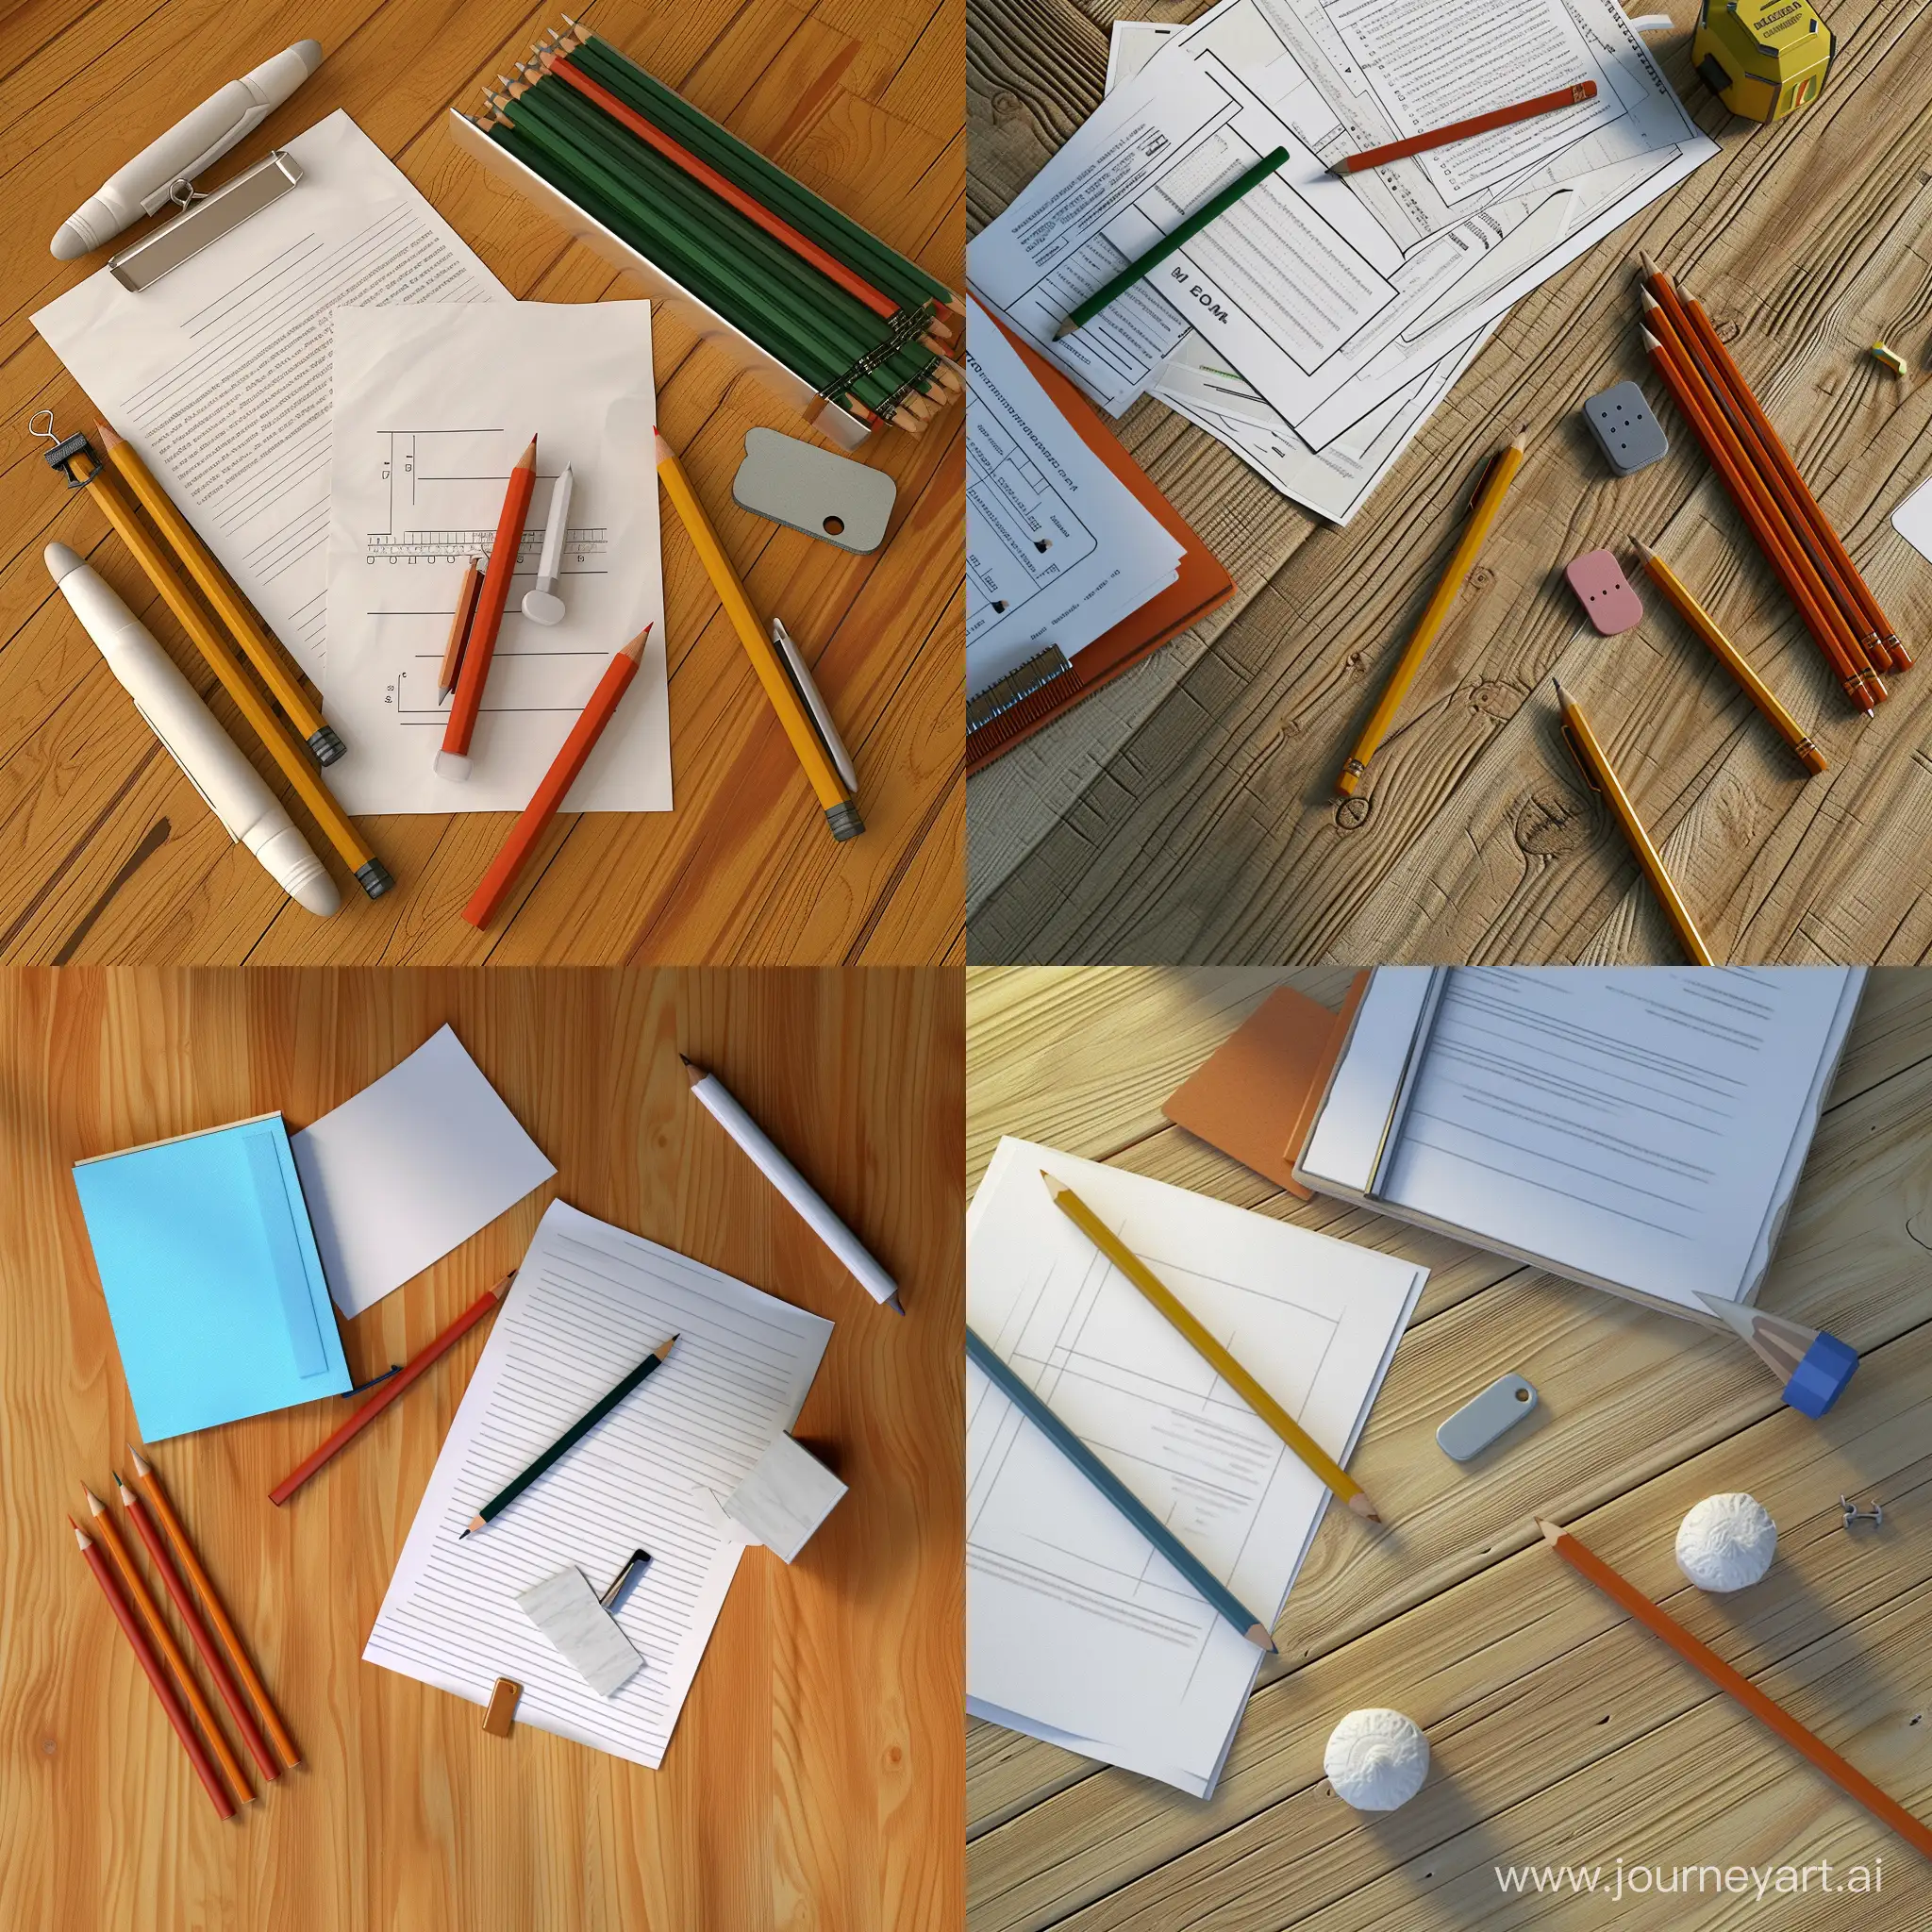 Pens, pencils, couple of papers with tables, eraser are on the wood table, view from above. Stylized image rendered in Blender